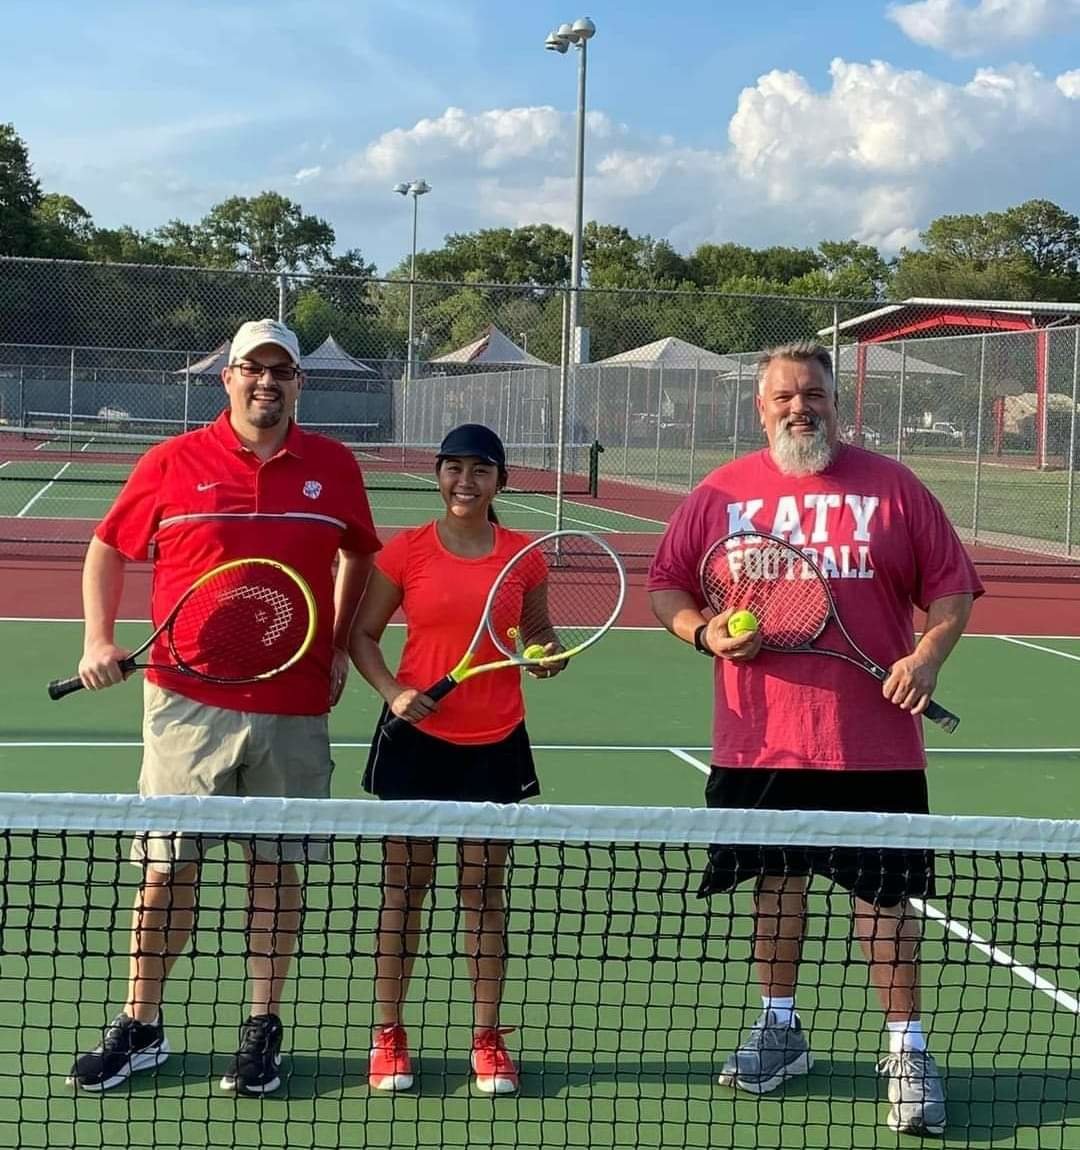 Council Member-at-Large and Mayor Pro Tem Chris Harris, Aileen Rios of Harvest Midstream, and Ward B Council Member Rory Robertson take the court for a friendly game of tennis.